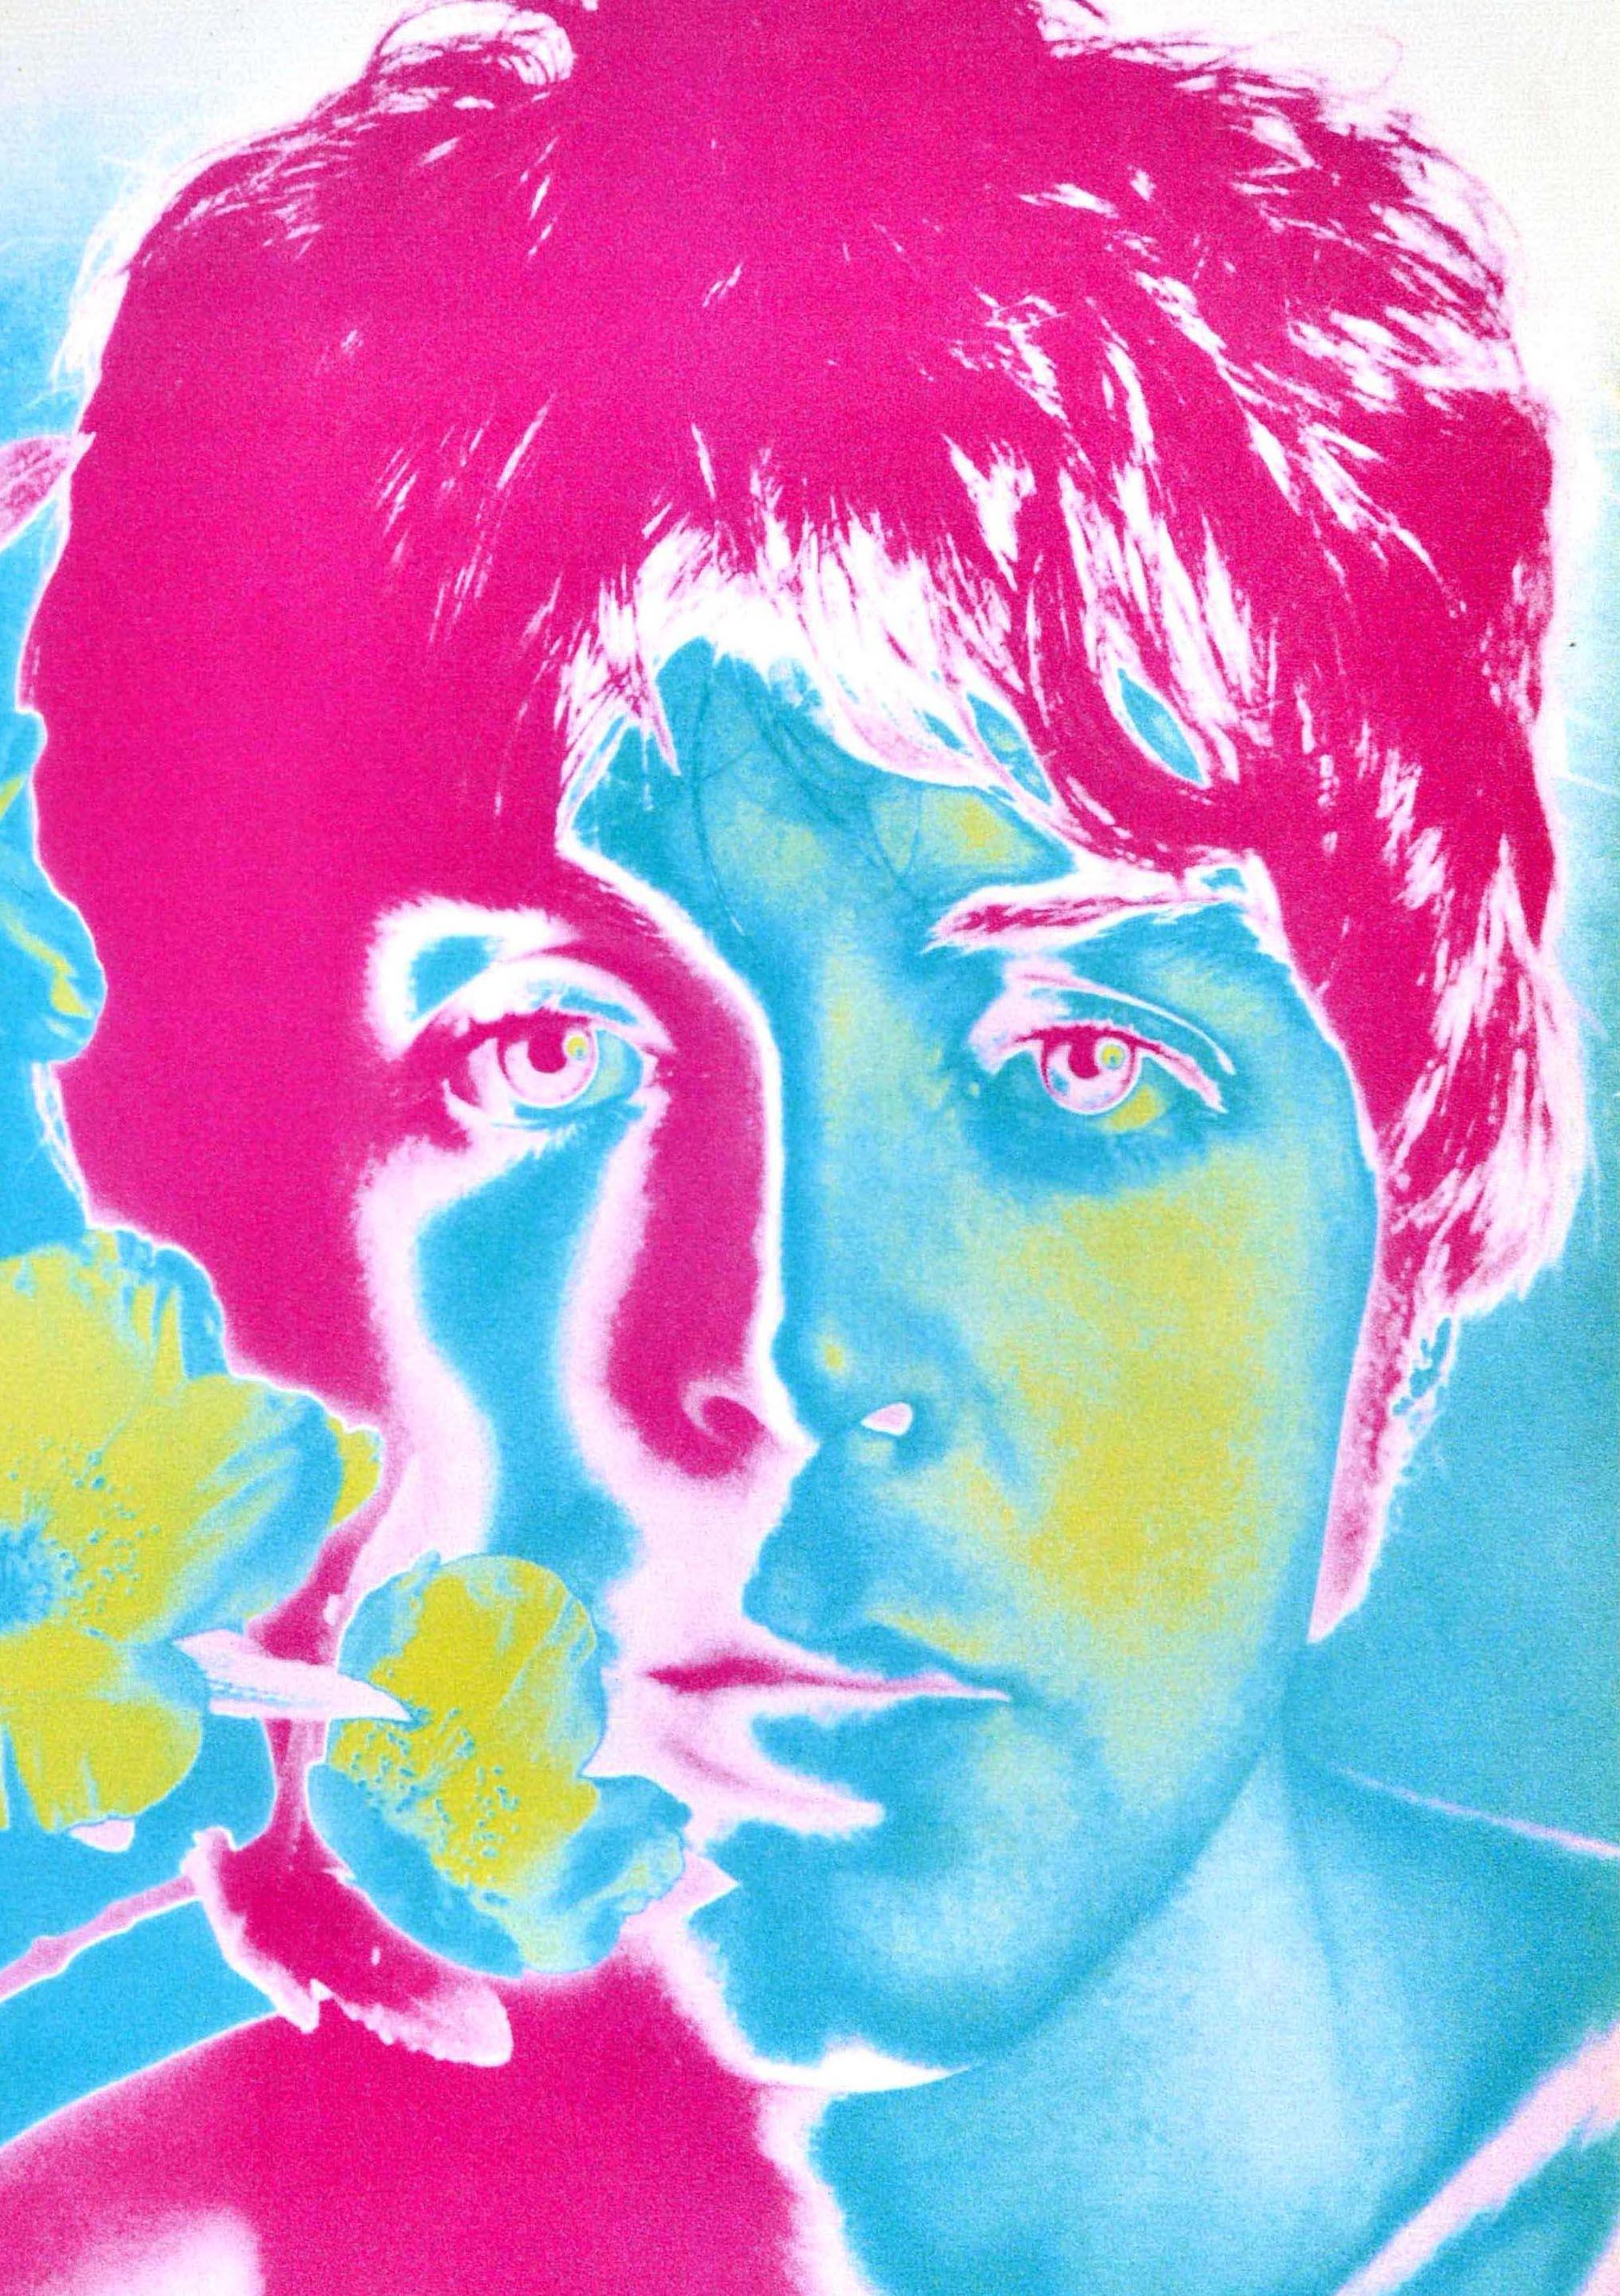 Original vintage music advertising poster featuring a colourful and psychedelic photo design using a new solarisation technique by the American photographer Richard Avedon (1923-2004) of the Beatles guitarist and singer-songwriter Paul McCartney